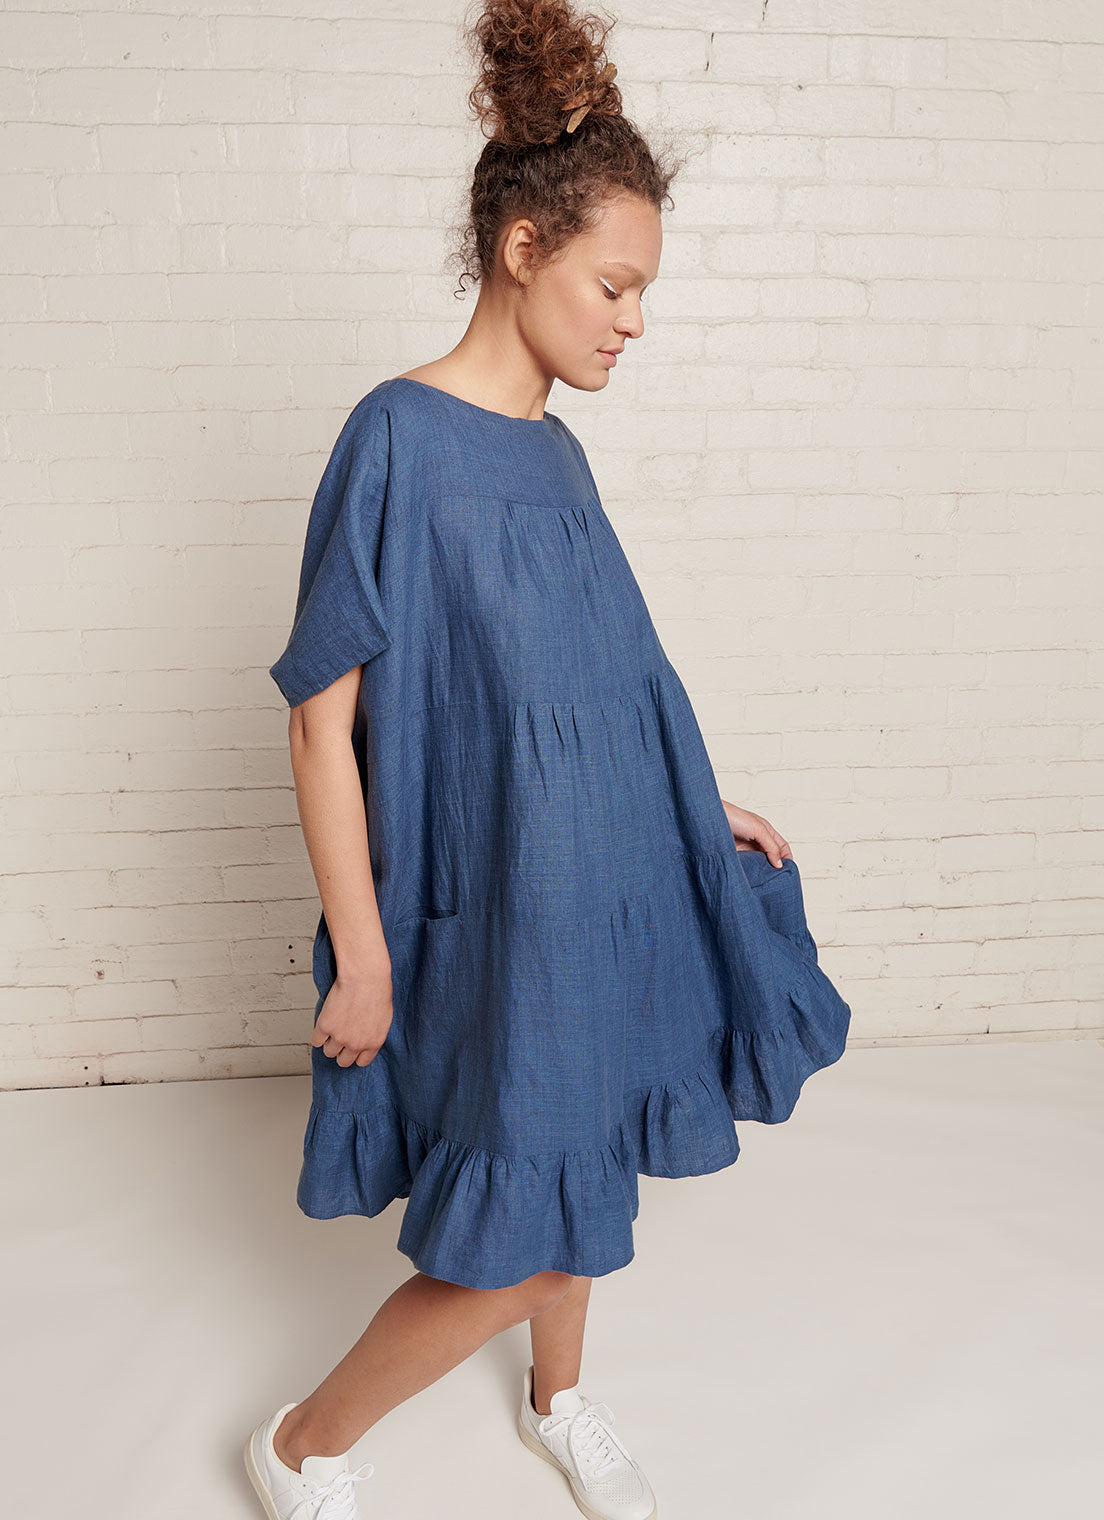 An indigo, easy fit, knee-length, tiered dress with round neckline, short sleeves, tie closures at the back made from yarn dye washed linen